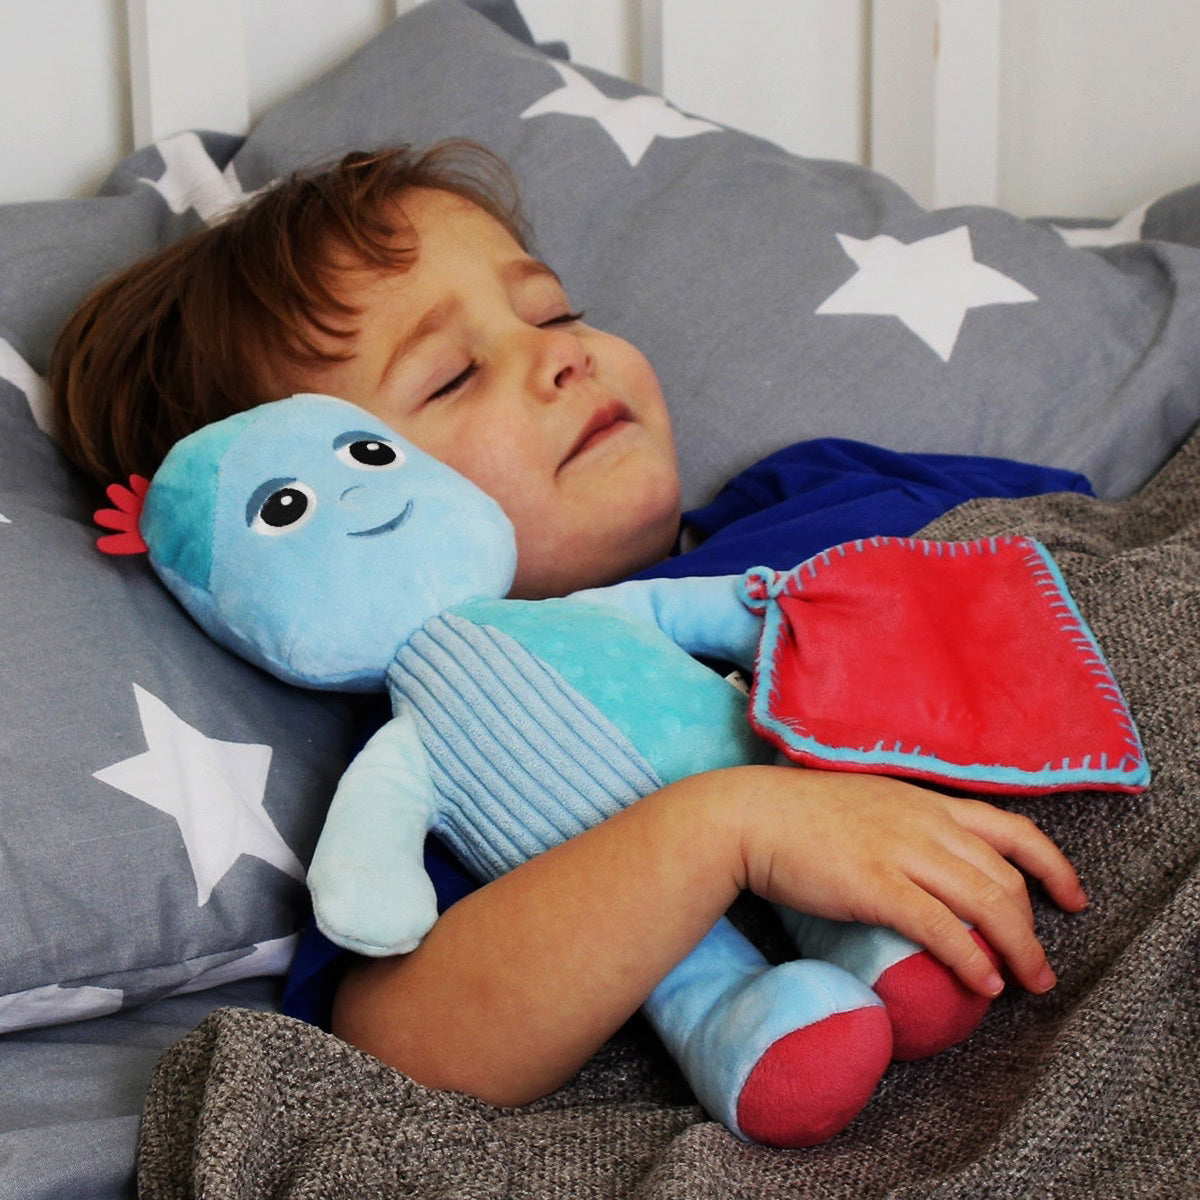 In the Night Garden Talking Igglepiggle 32cm Soft Toy